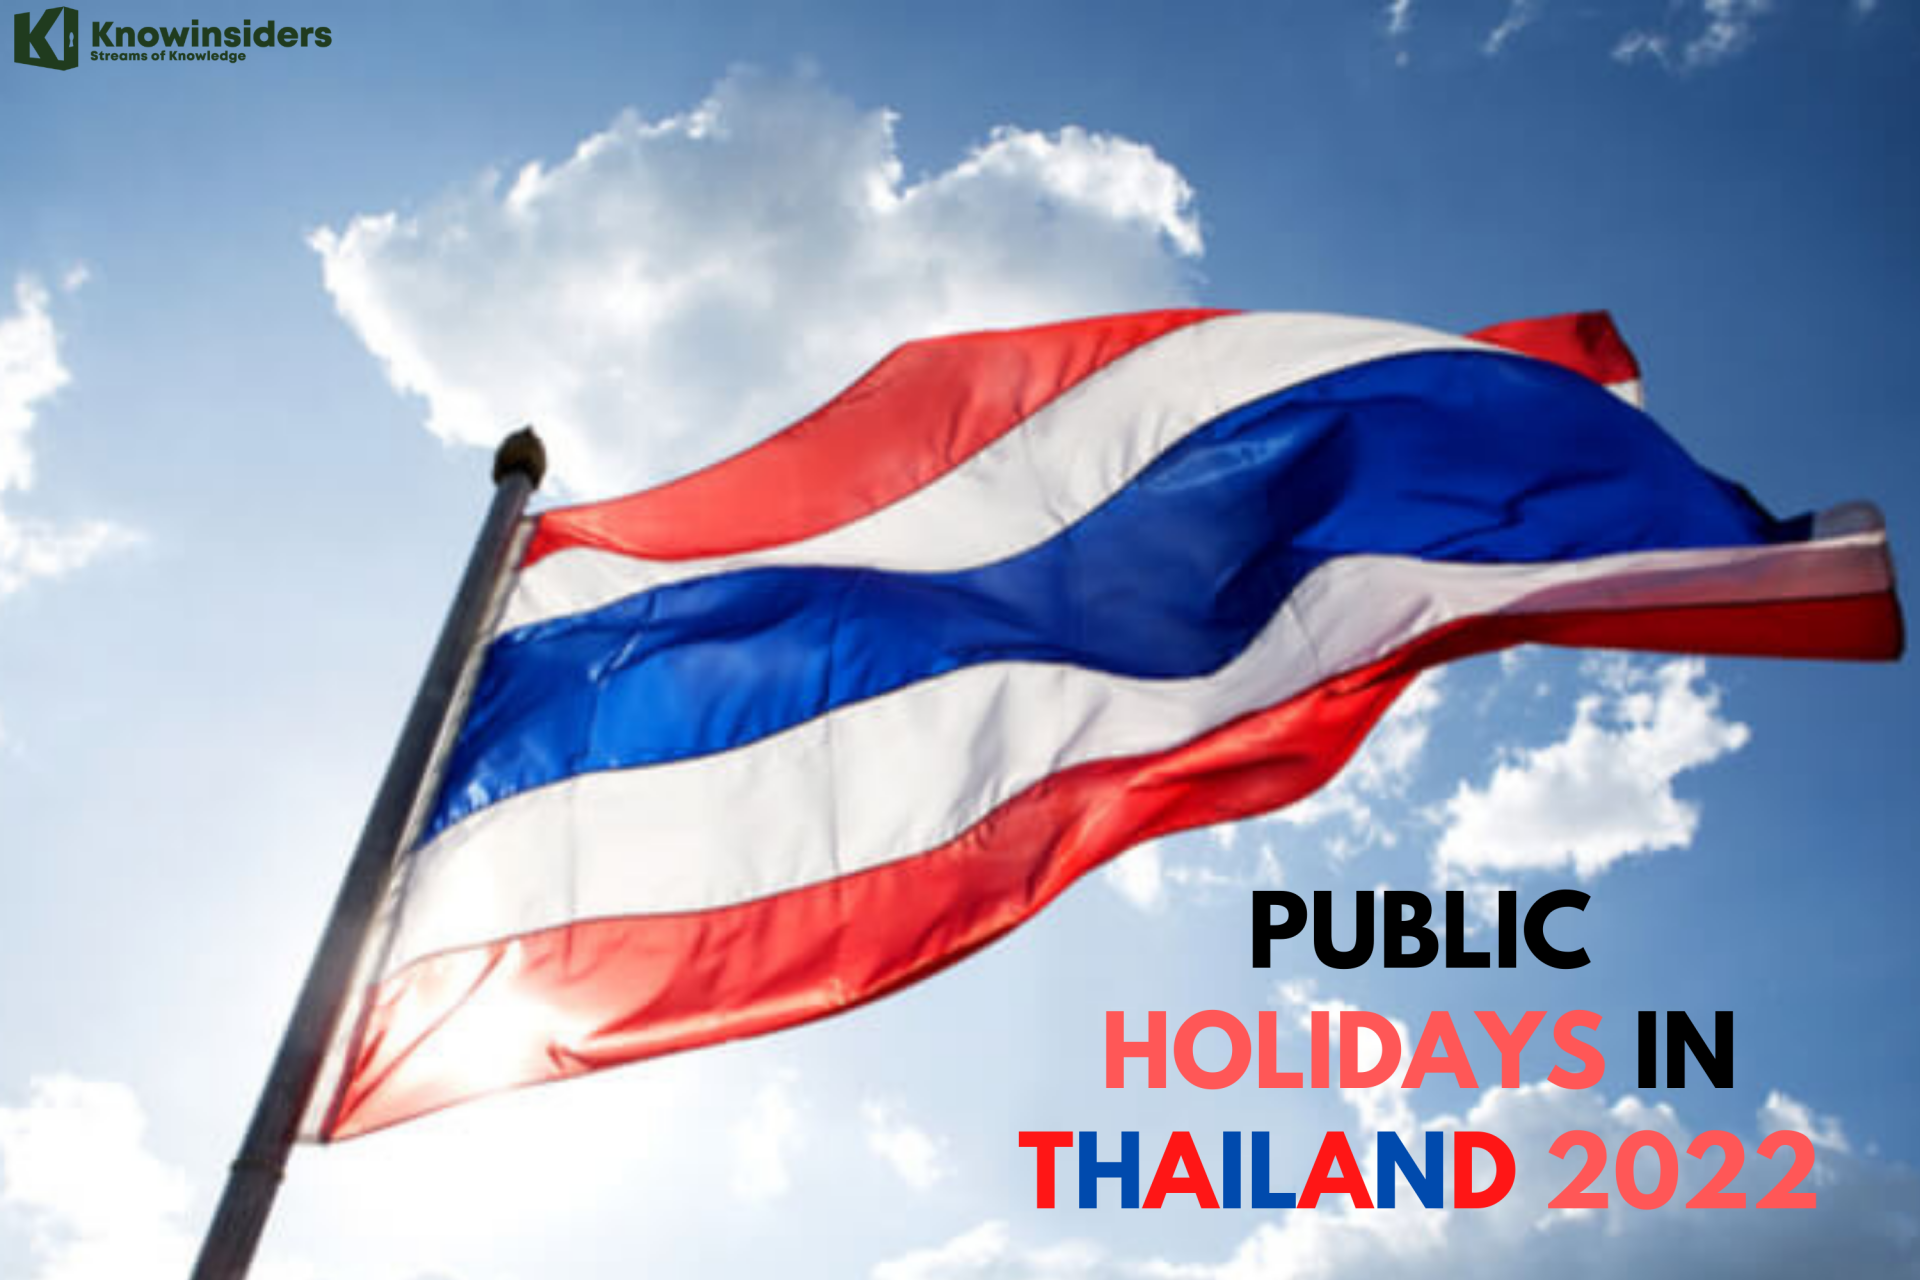 The Most Important Public Holidays in Thailand In 2022